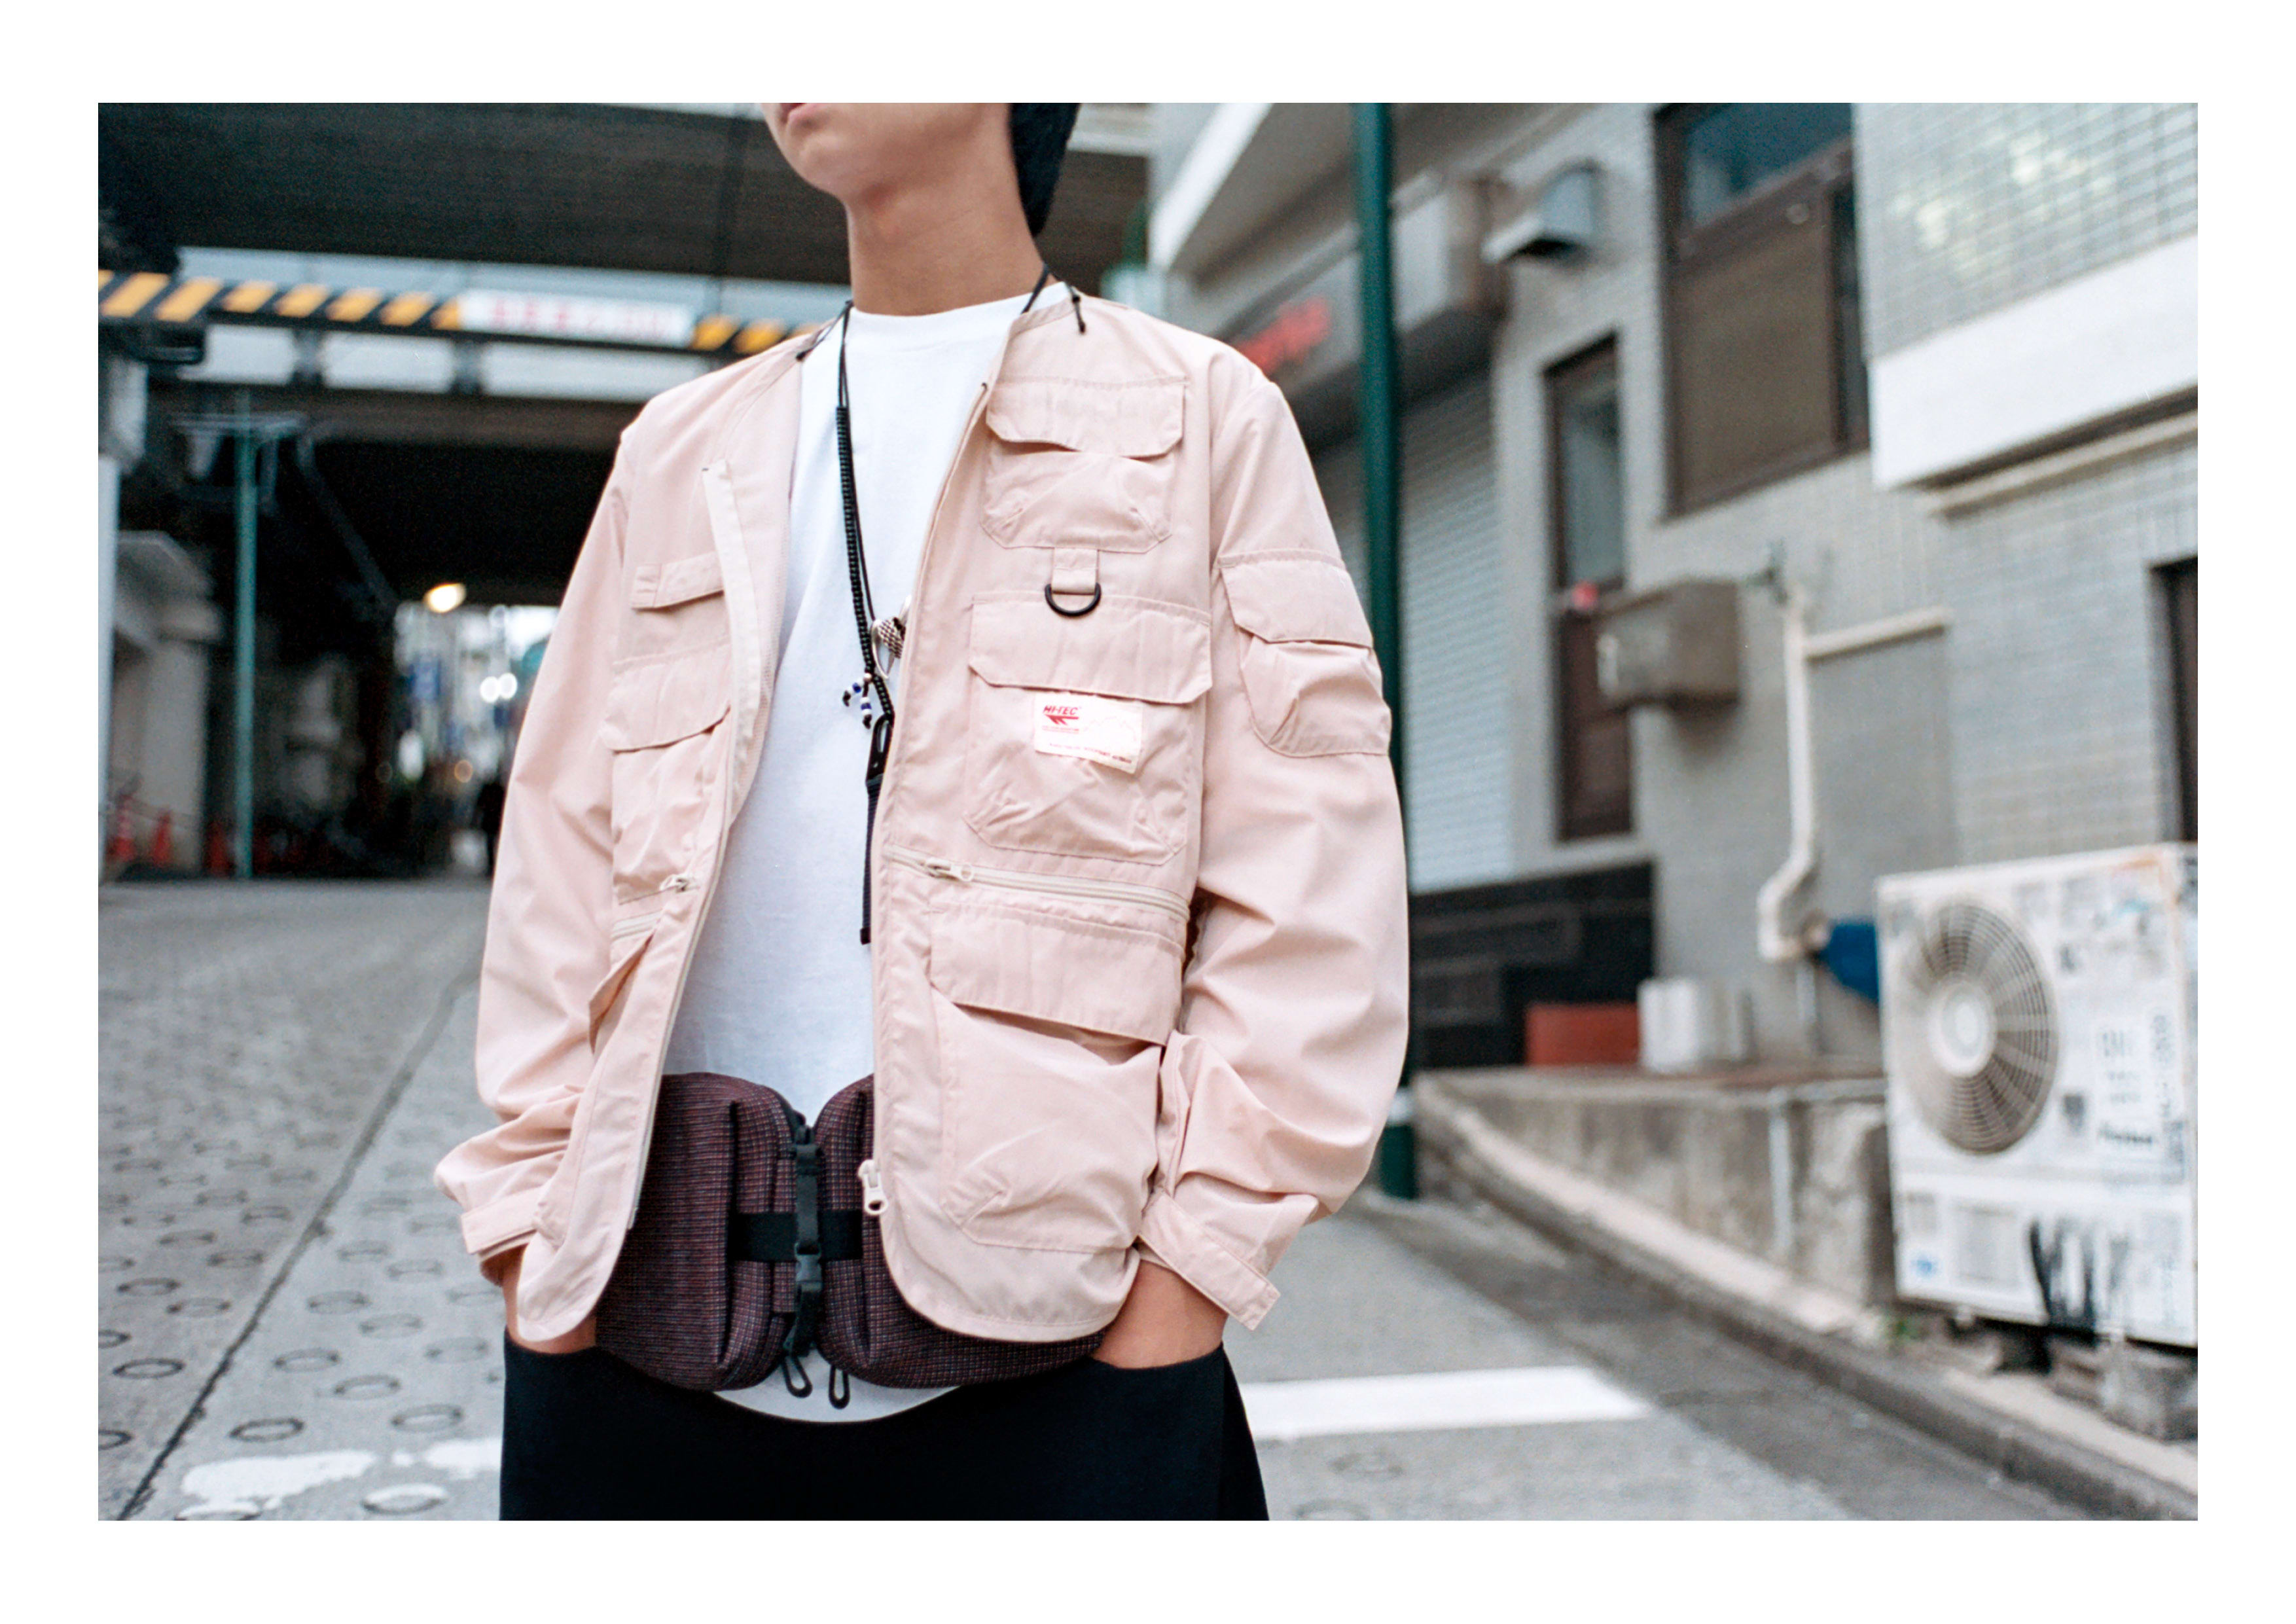 Revel in High Summer with Hi-Tec Japan's Shibuya Crossover Editorial ...